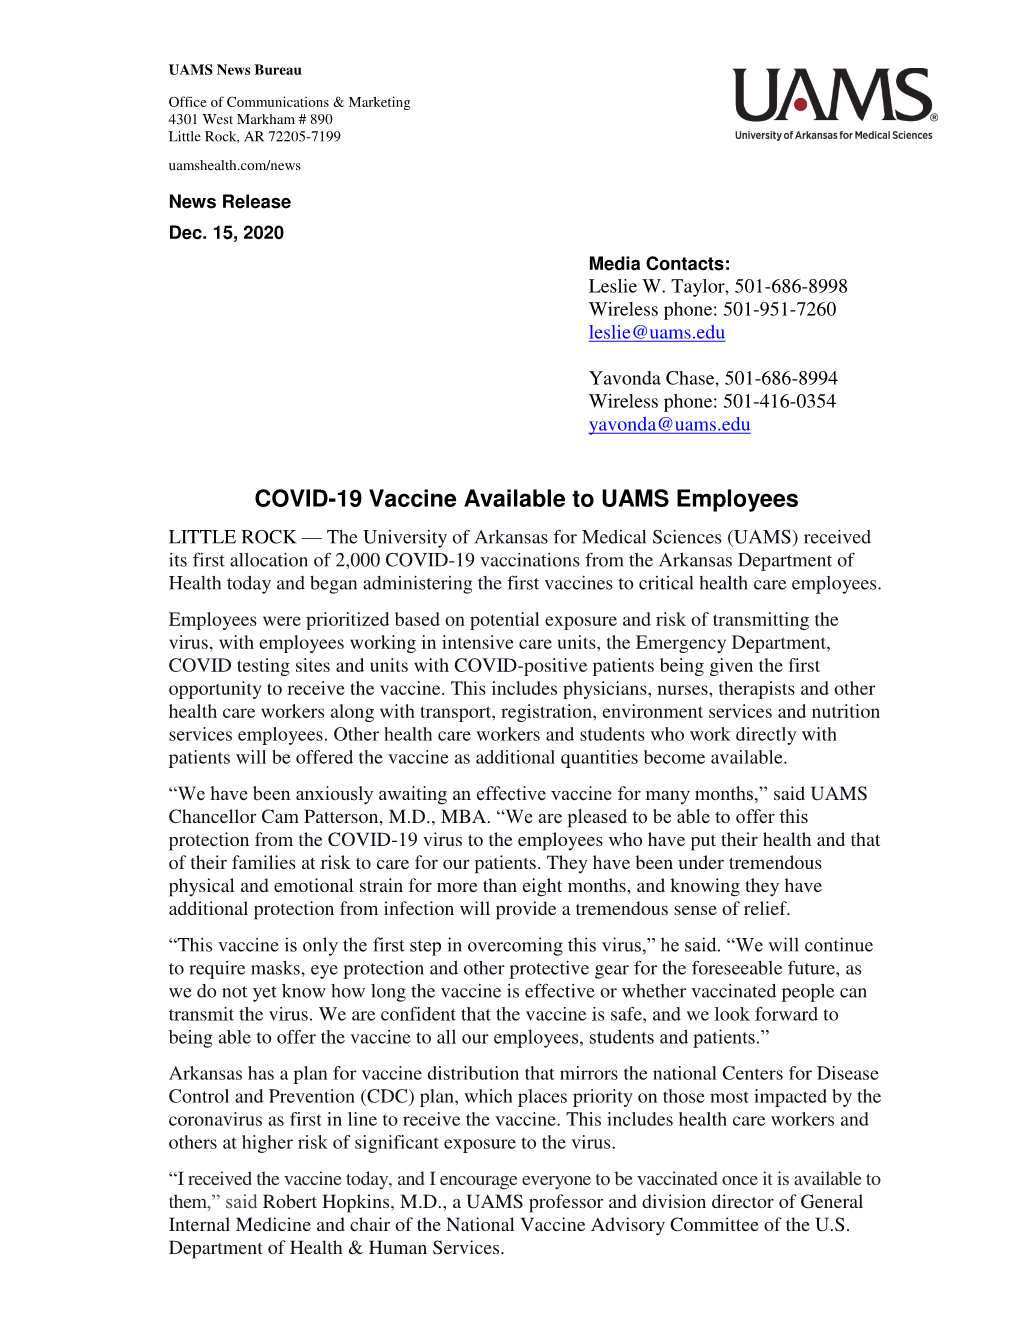 COVID-19 Vaccine Available to UAMS Employees